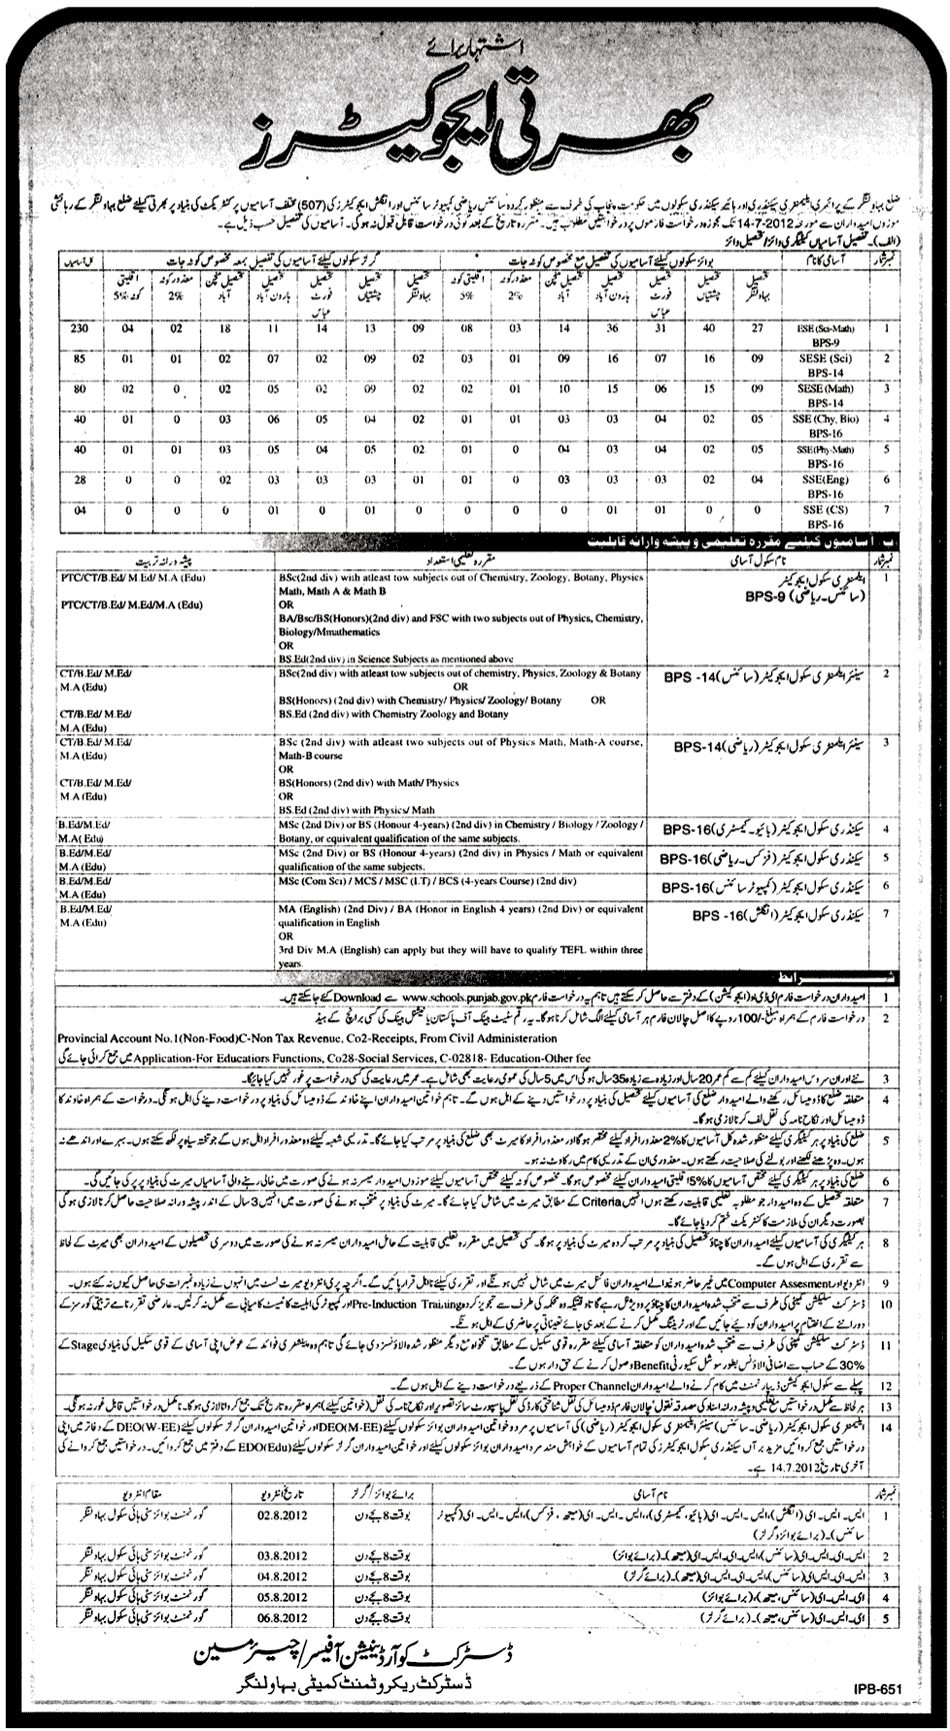 Teachers/Educators Required by Government of Punjab at Primary, Elementary, Secondary and Higher Secondary Schools (Bahawalnagar District) (507 Vacancies) (Govt. Job)